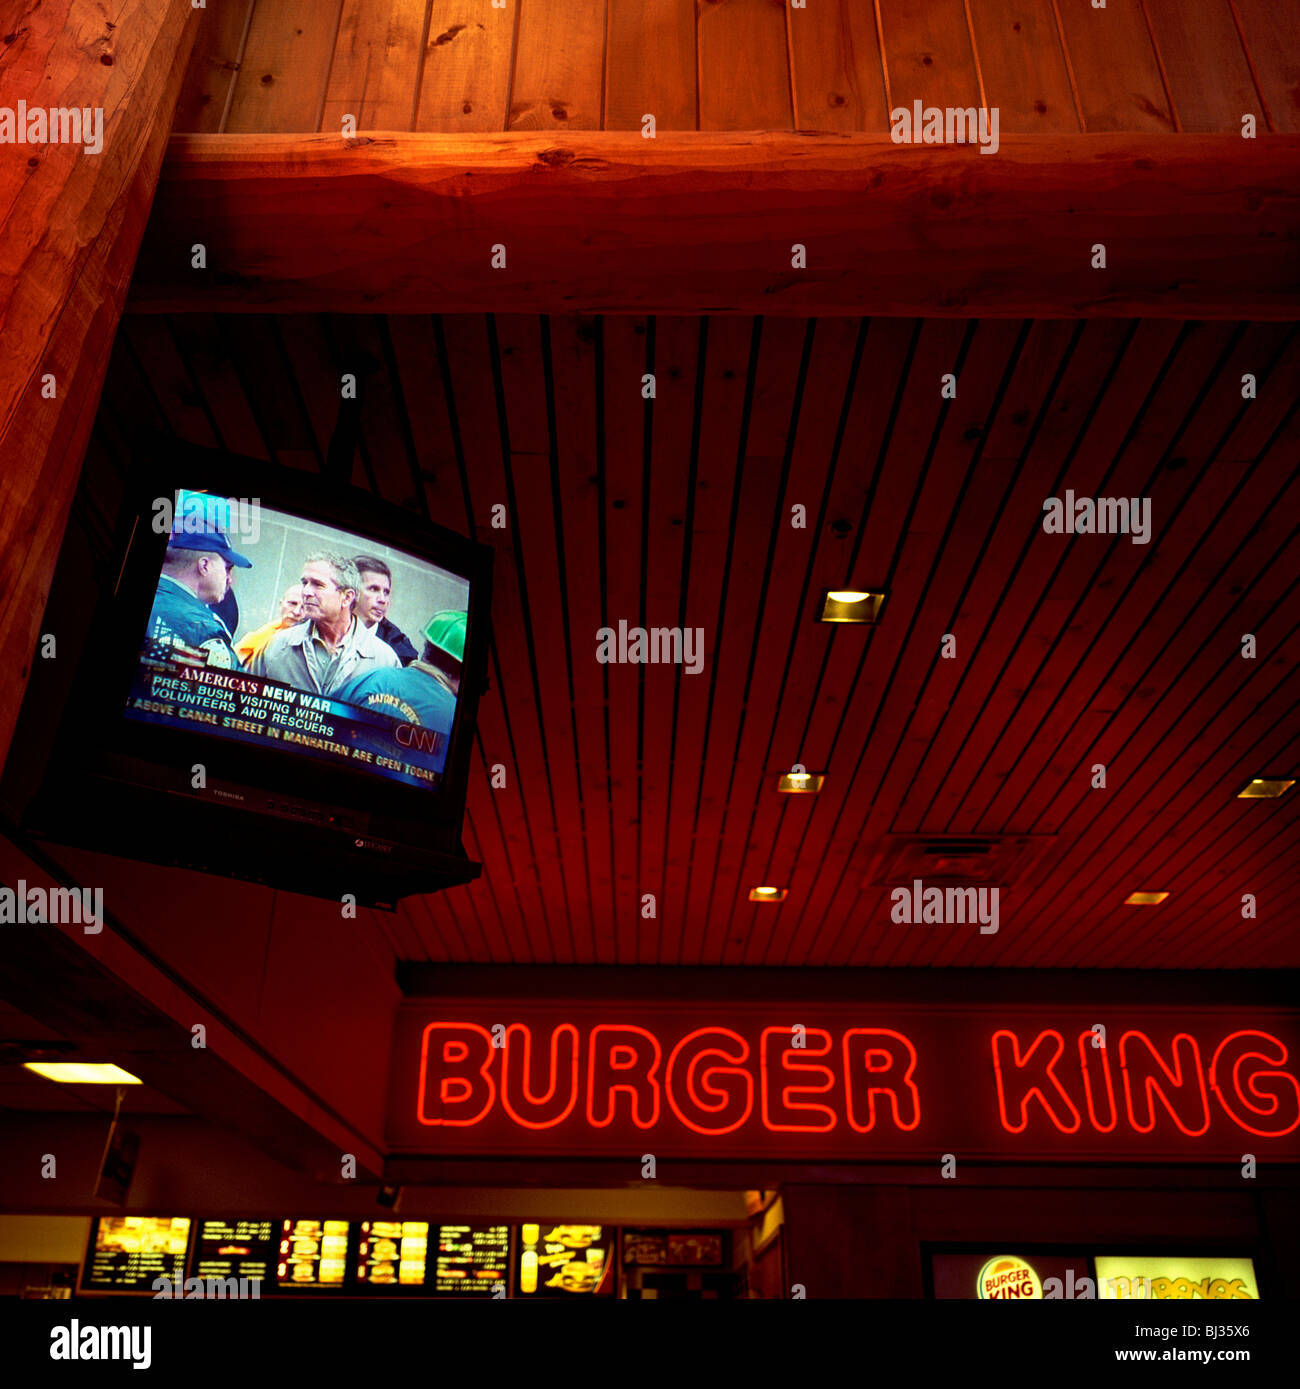 Days after 9/11, President George W Bush tours Ground Zero on CNN TV feed at a New York State rest stop Burger King restaurant. Stock Photo